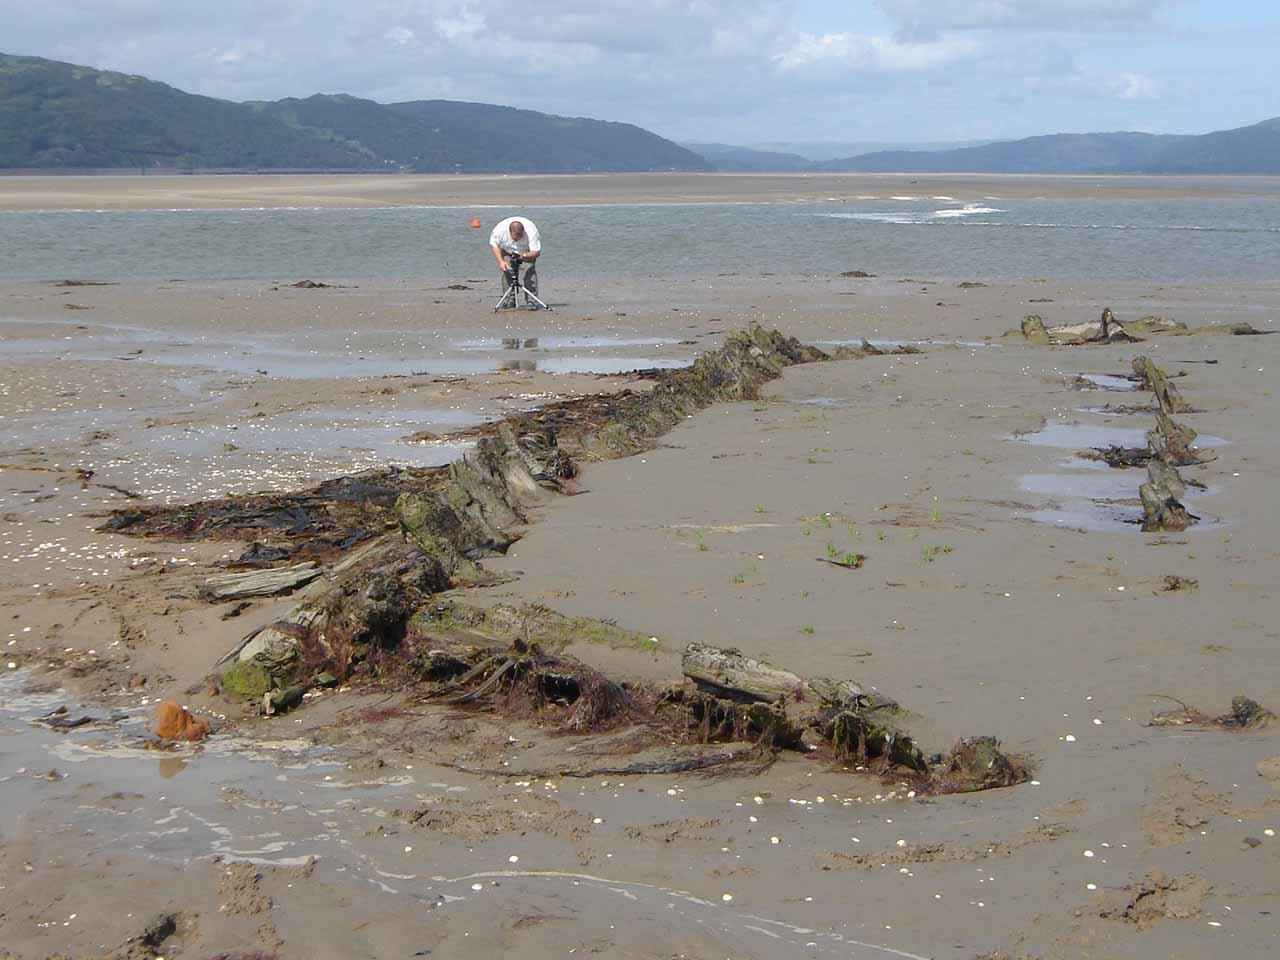 Remains of a Slate Schooner (Hulk 1) at Ynyslas Beach on the south bank of the River Dovey